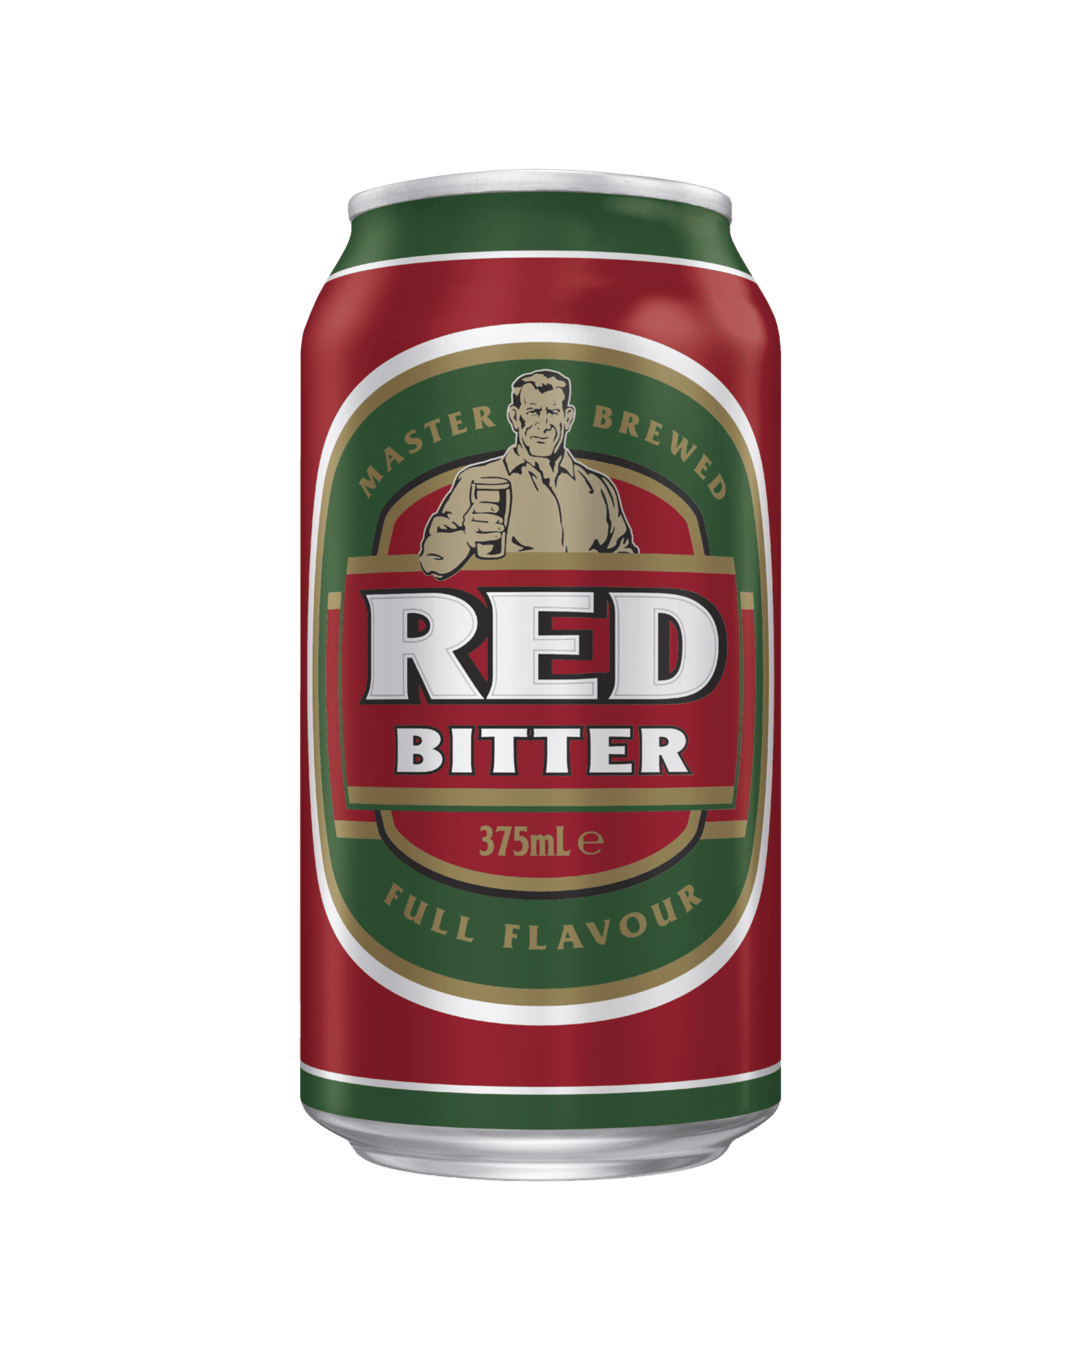 Buy Xxxx Bitter Cans 30 Block 375ml Online With Free Delivery In